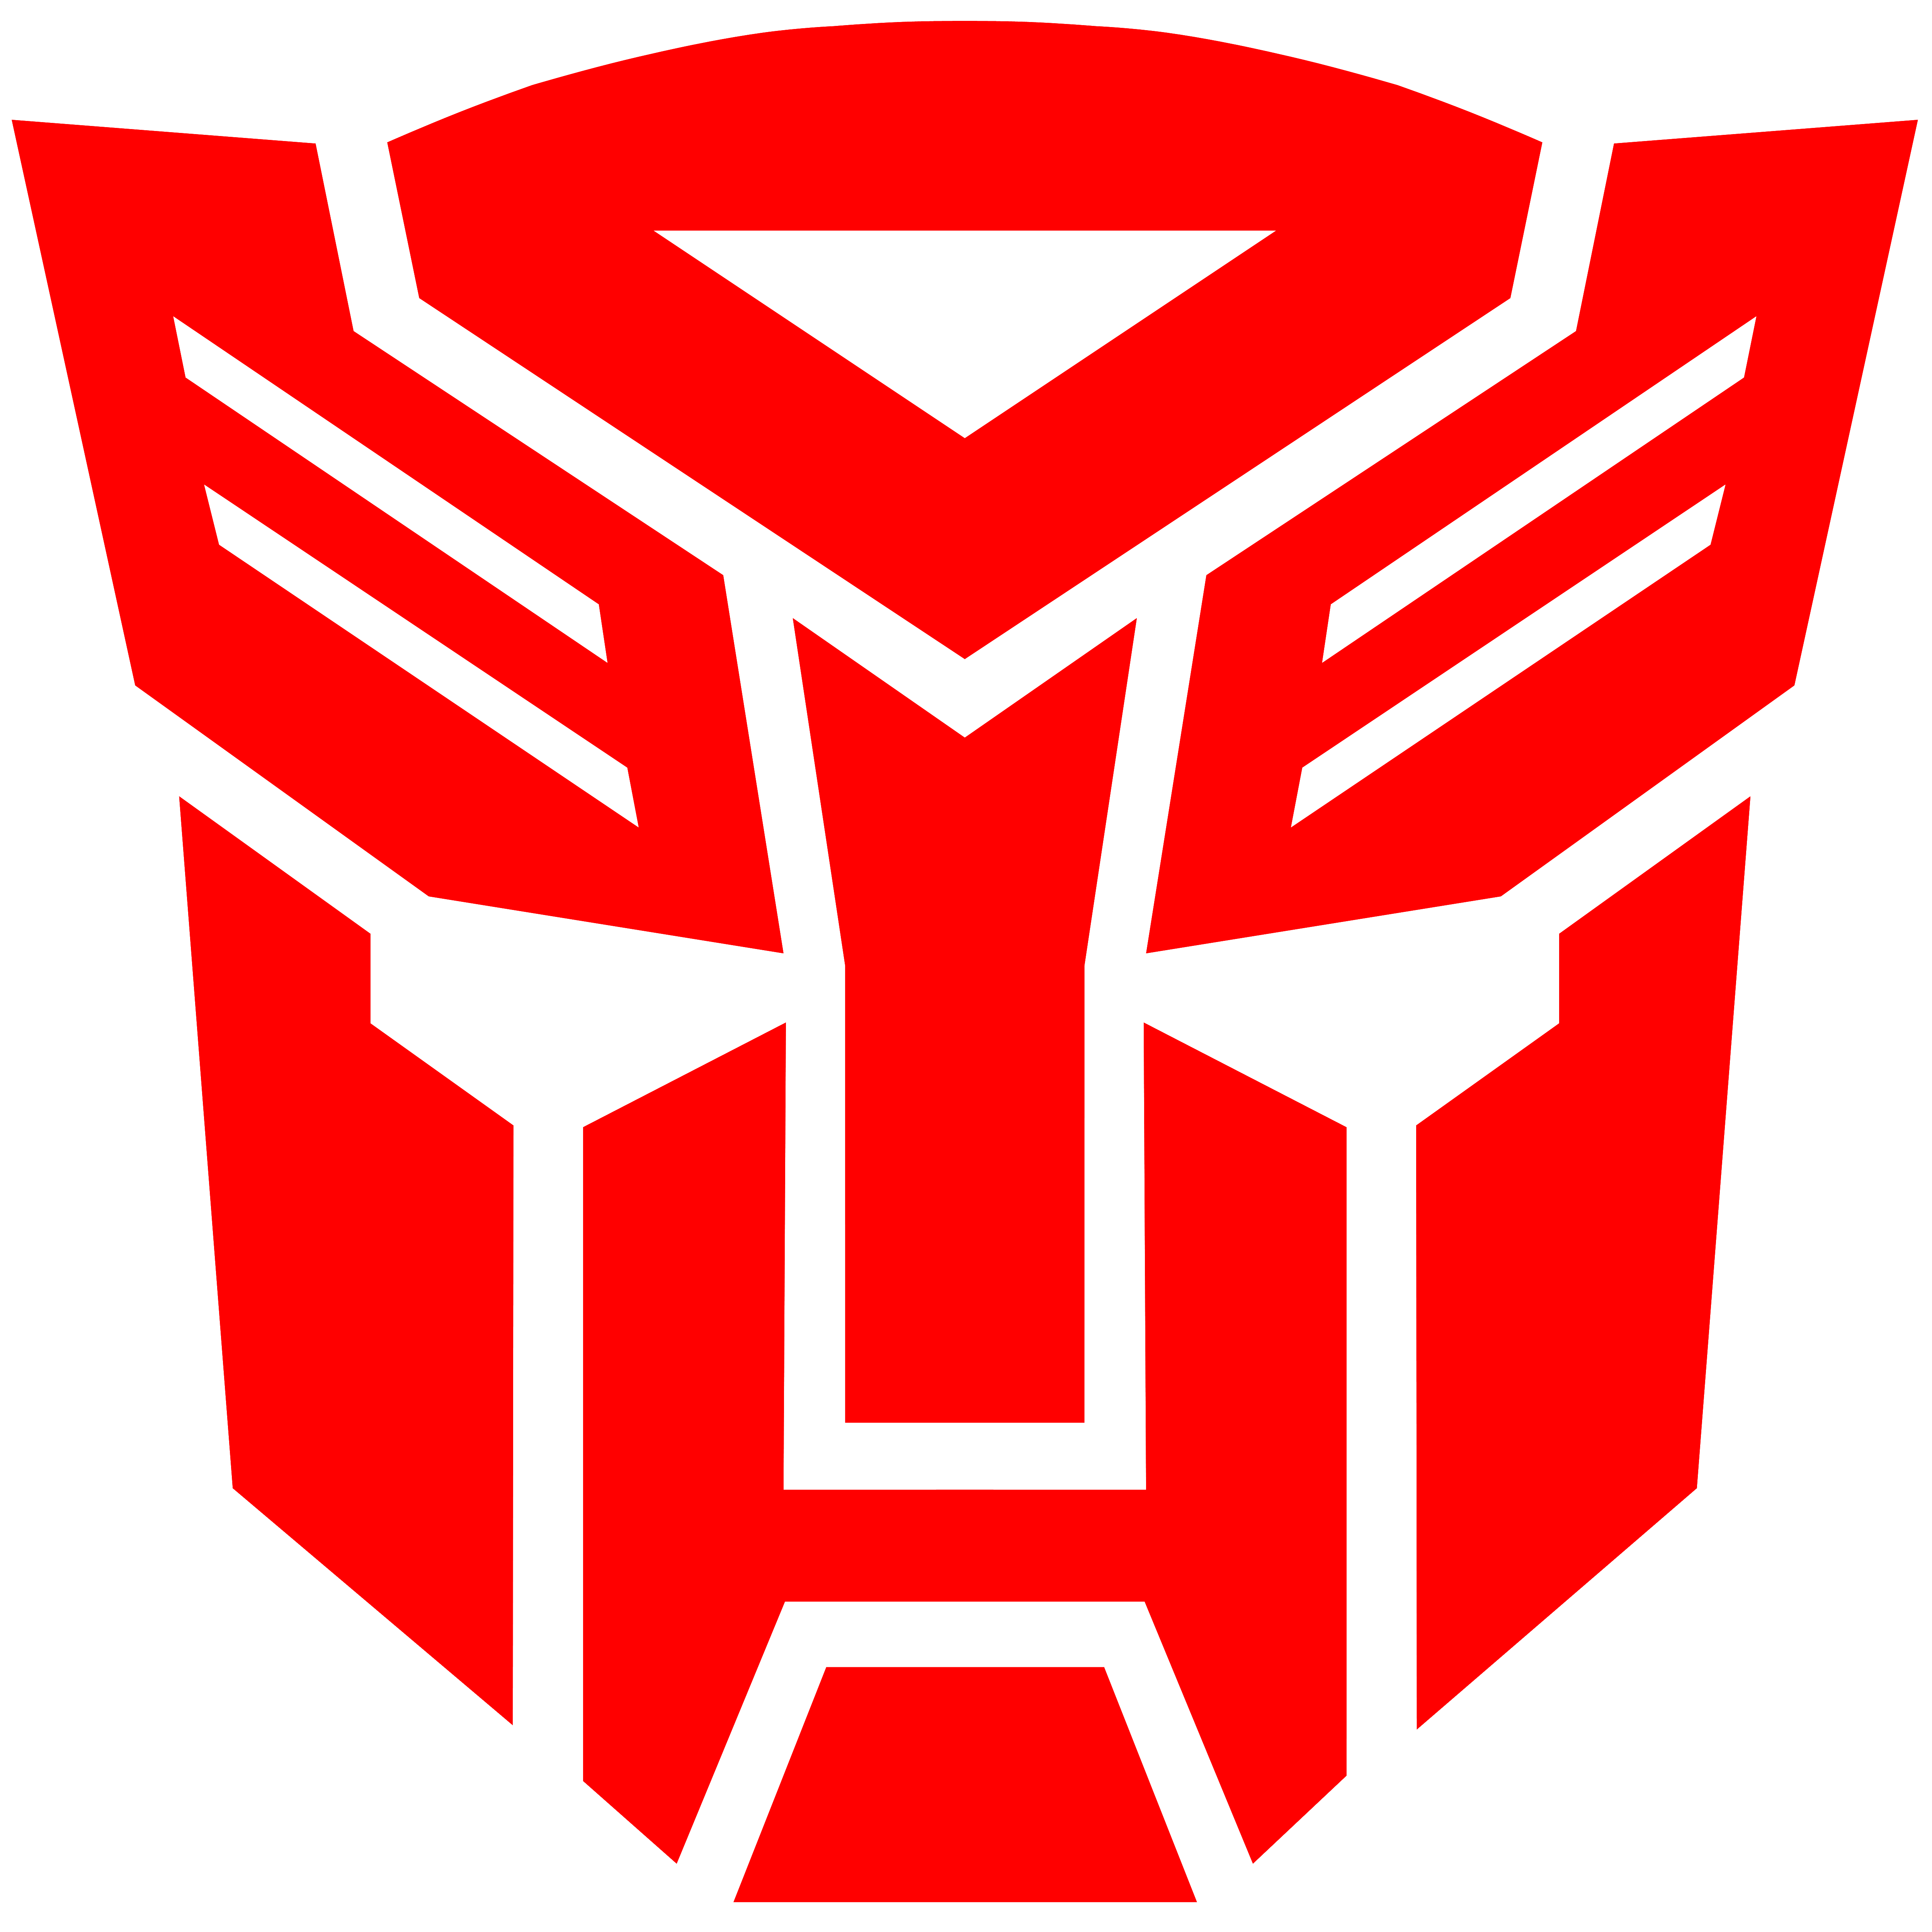 Transformers cliparts 